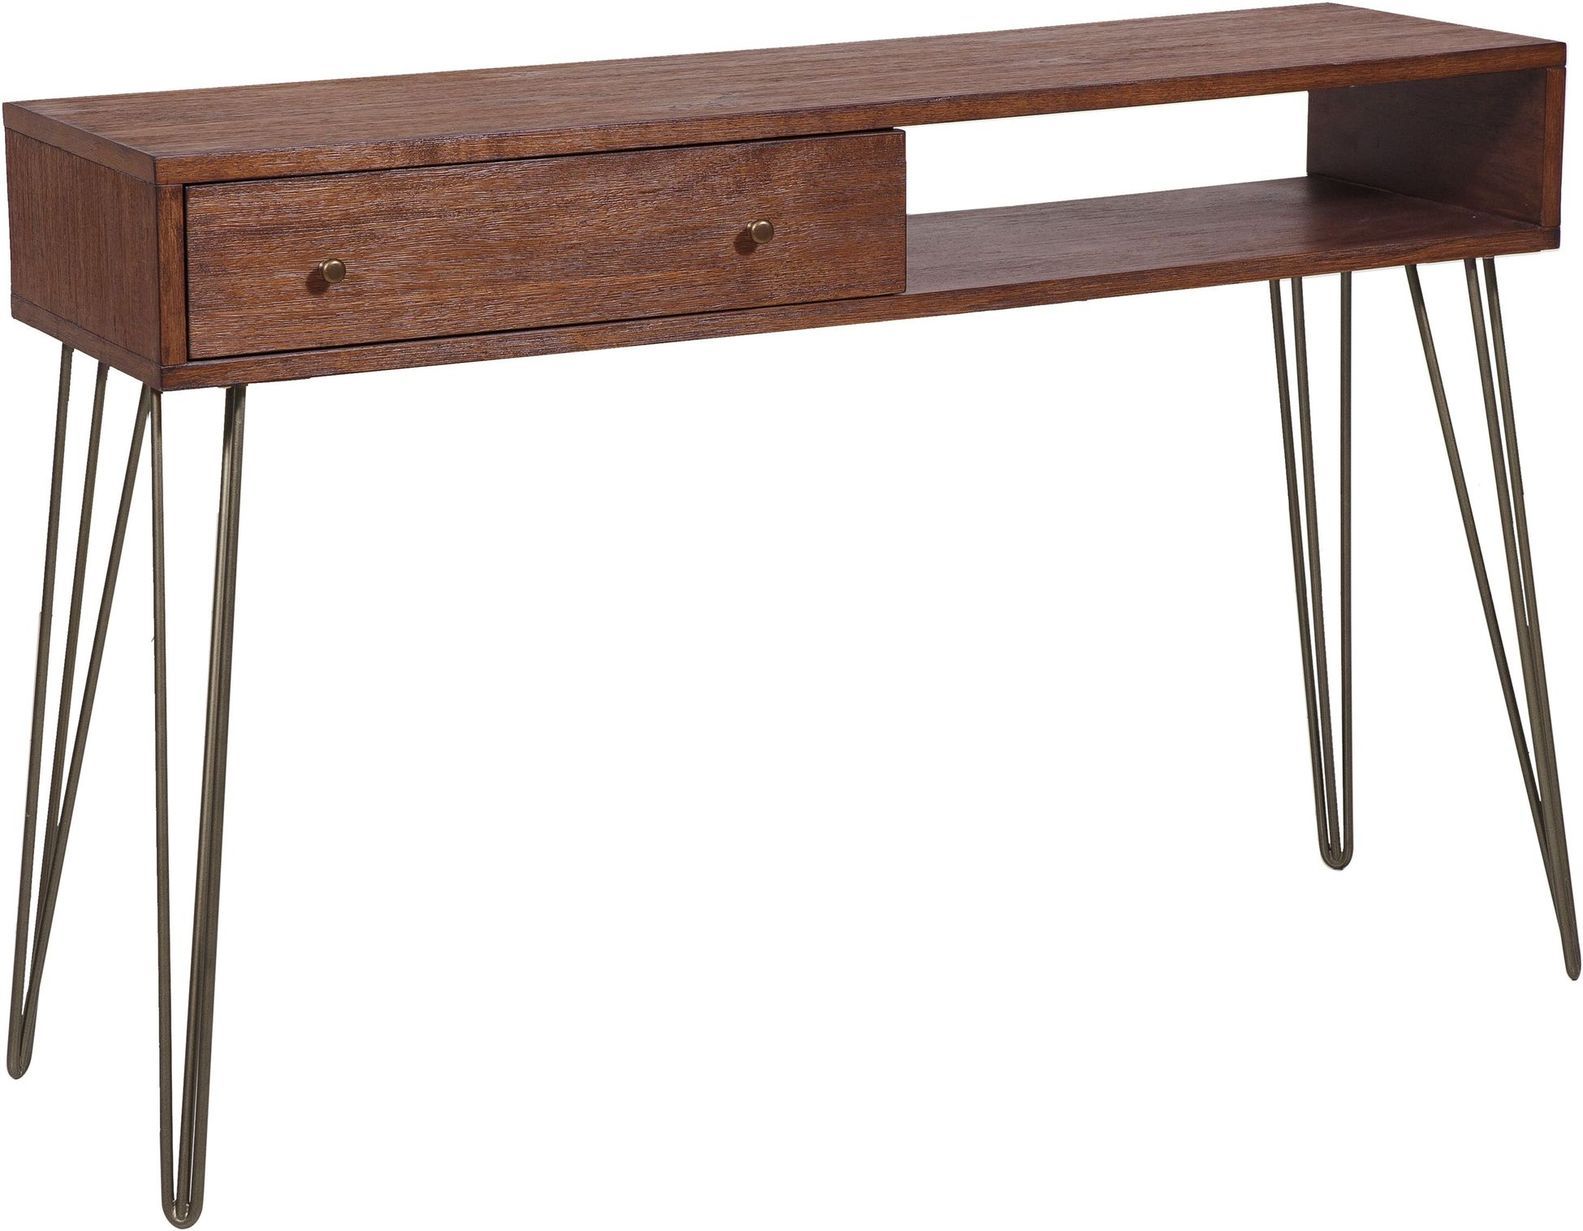 Mid Century Modern Walnut Acacia One Drawer Accent Storage Inside Square Modern Console Tables (View 19 of 20)